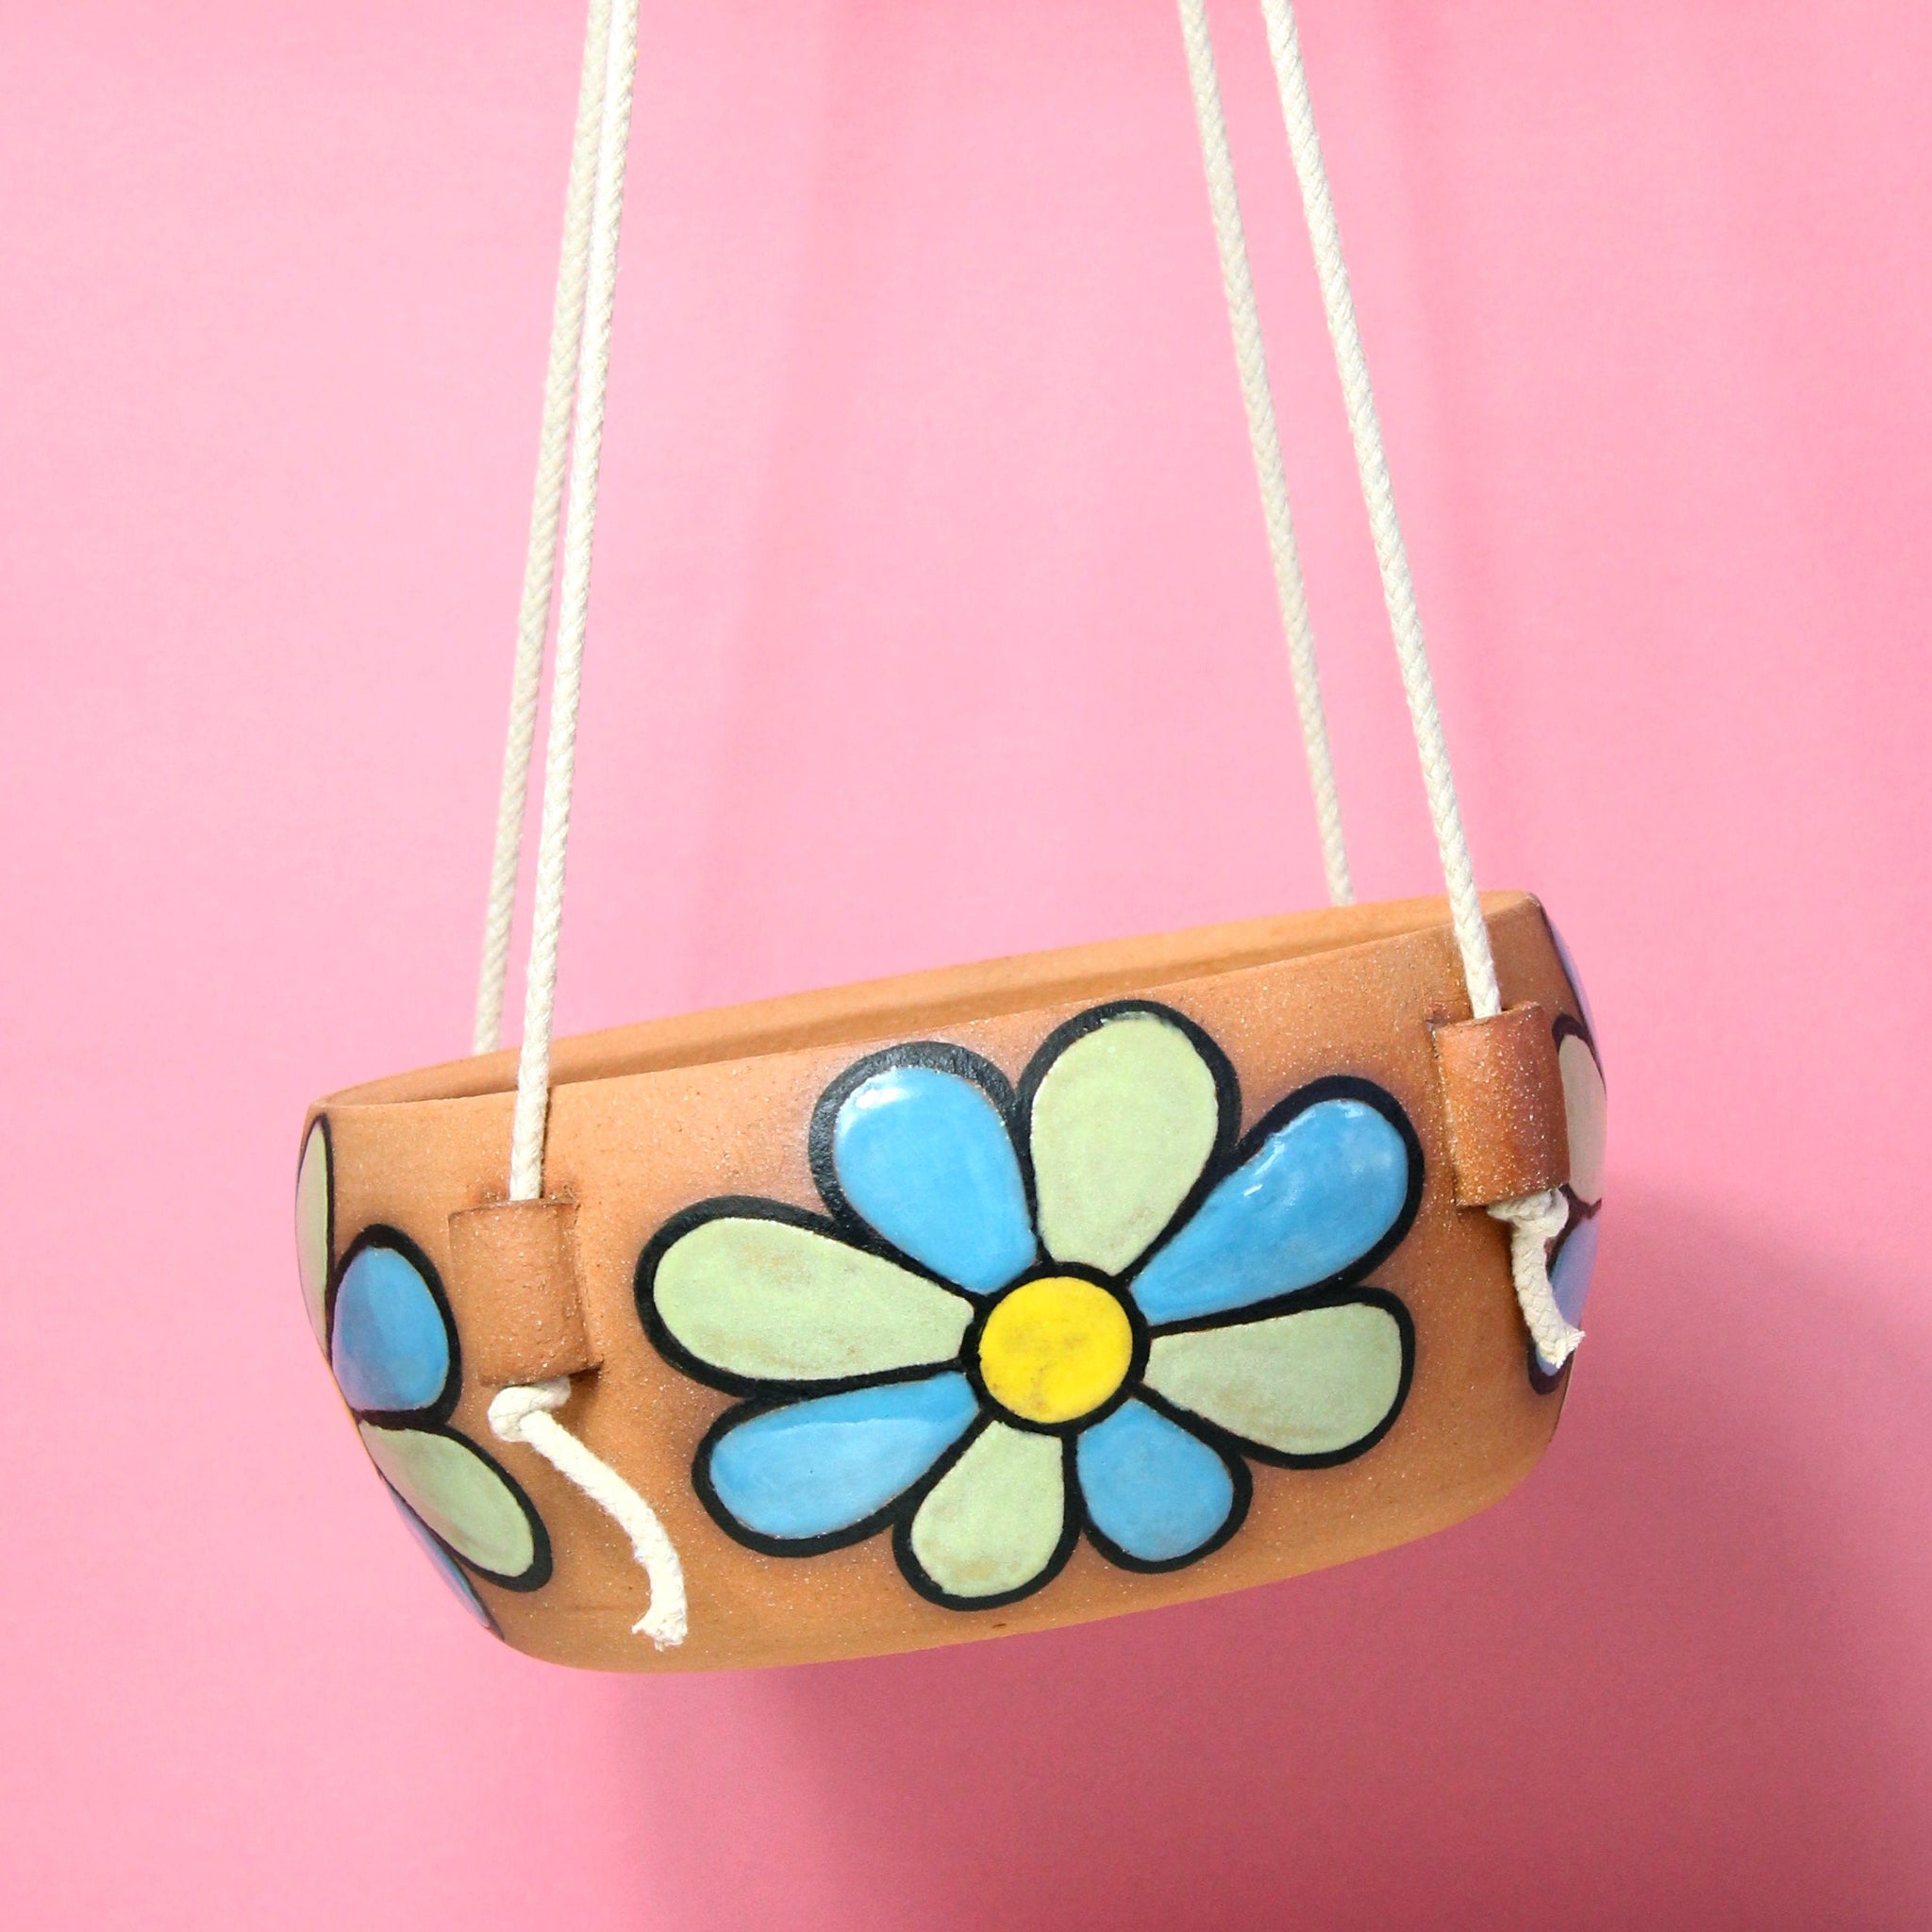 Made-to-Order Glazed Stoneware Hanging Planter with Flower Pattern